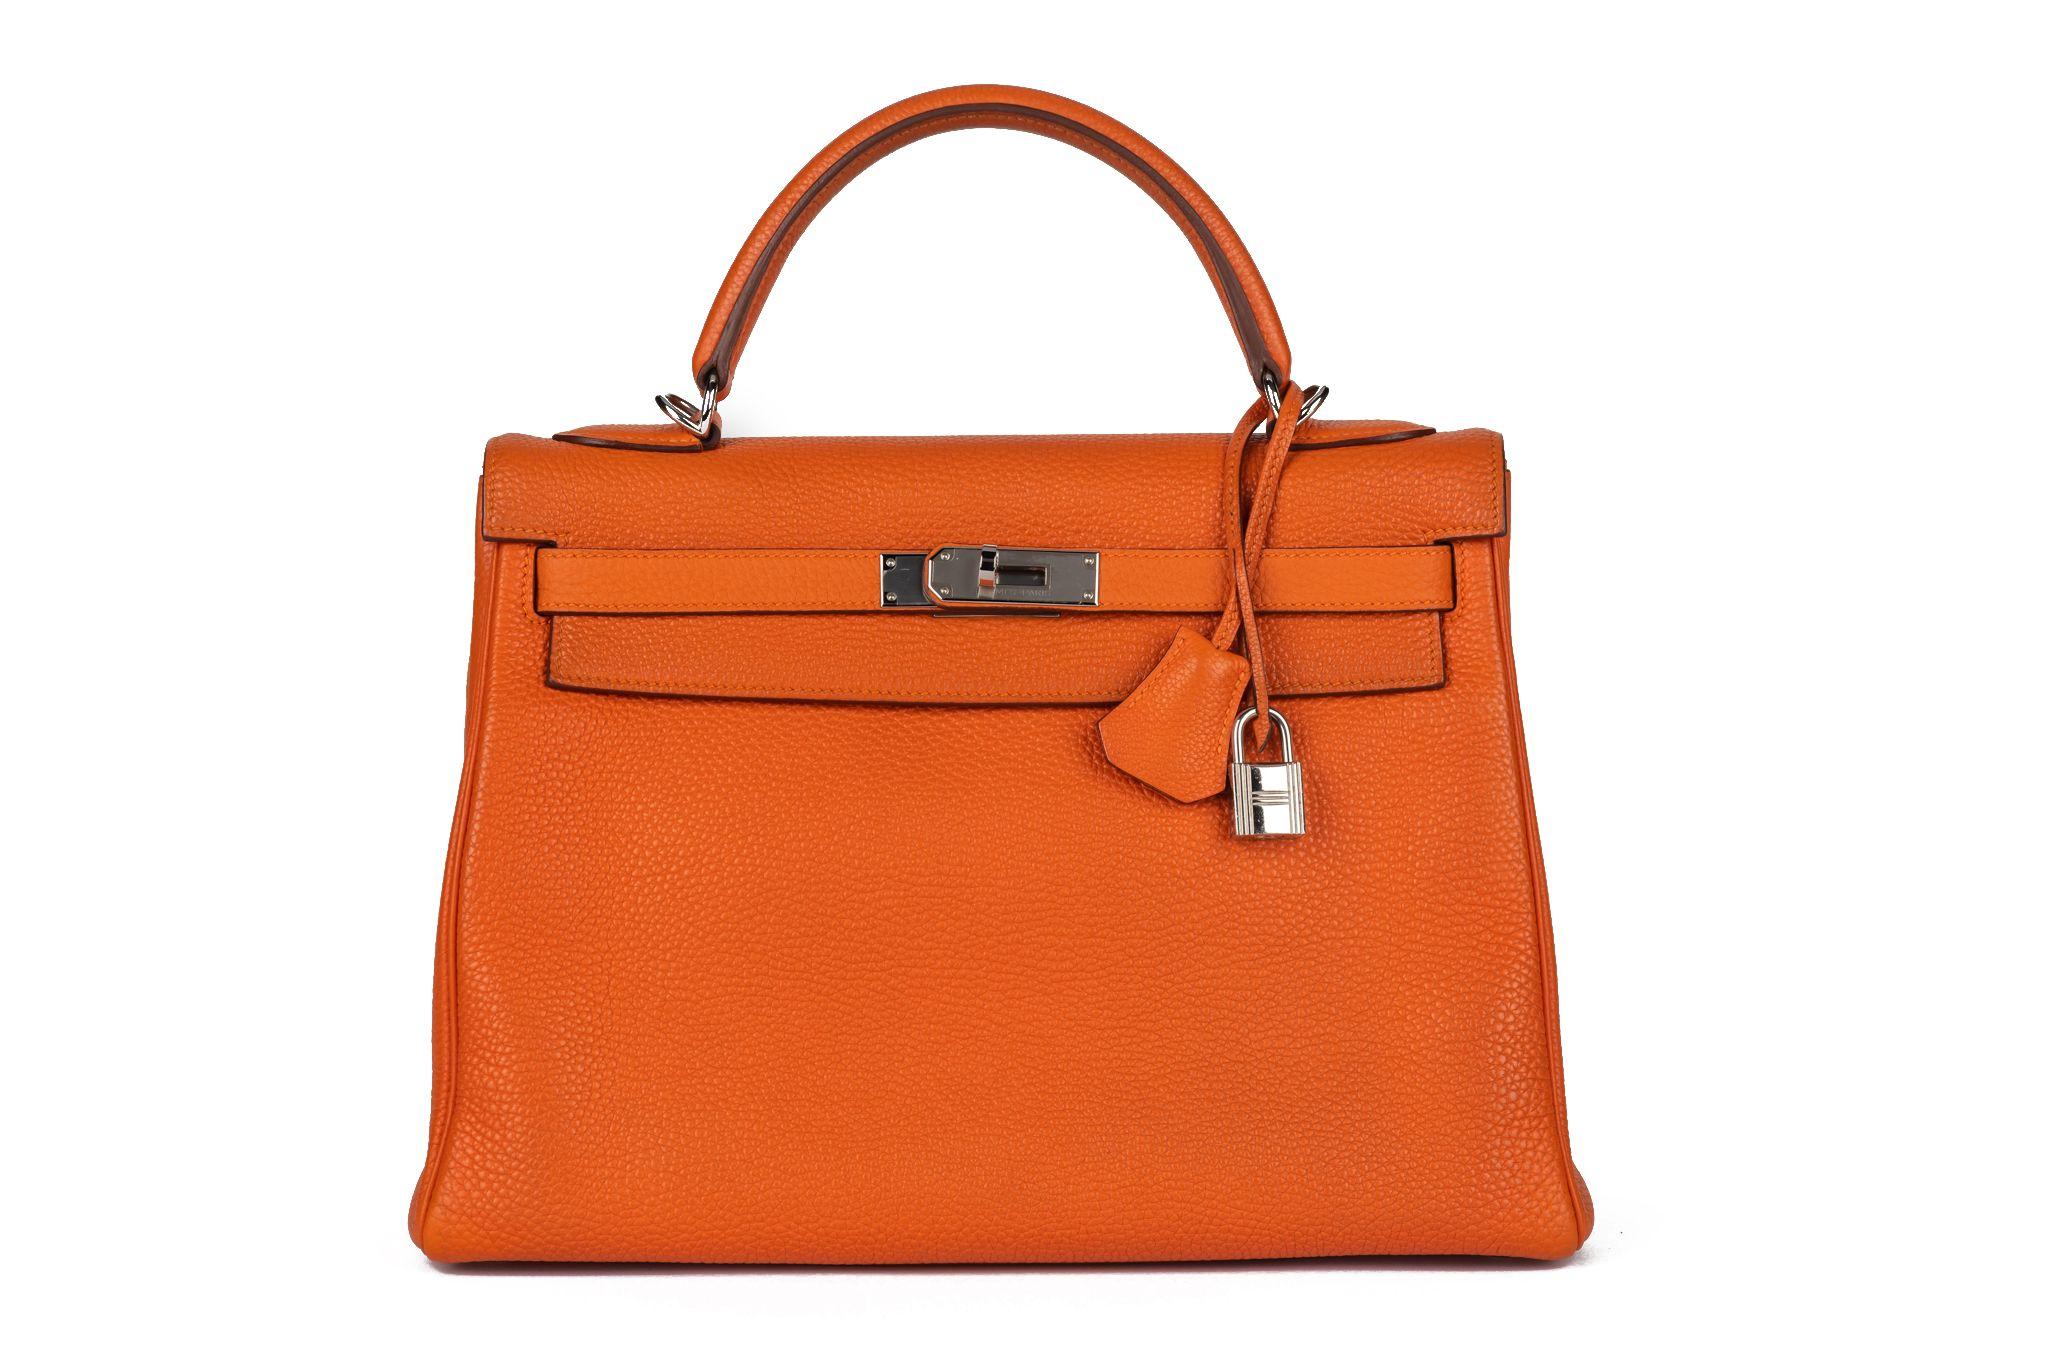 Hermès Kelly 32 retourne in Orange taurillon clemence leather, palladium hardware . The piece is in excellent condition and shows the date stamp K. The bag comes with the full set: clochette, tirette, lock, keys, dust cover, rain jacket and box.